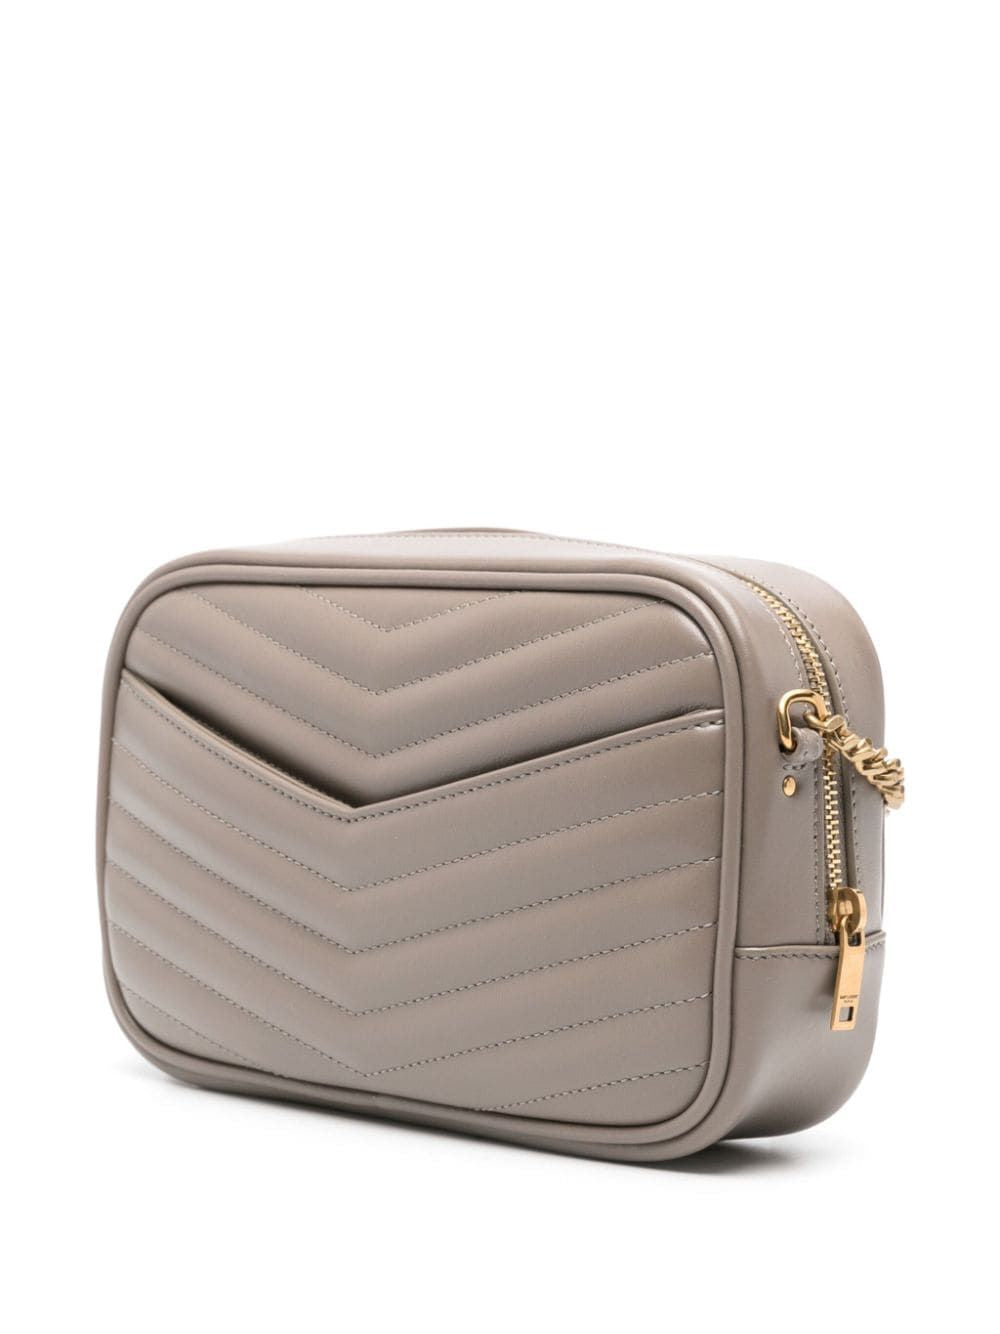 SAINT LAURENT Mini Lou Shoulder Bag in Greyish Brown - Calfskin Leather with Brass Accents for Women SS24